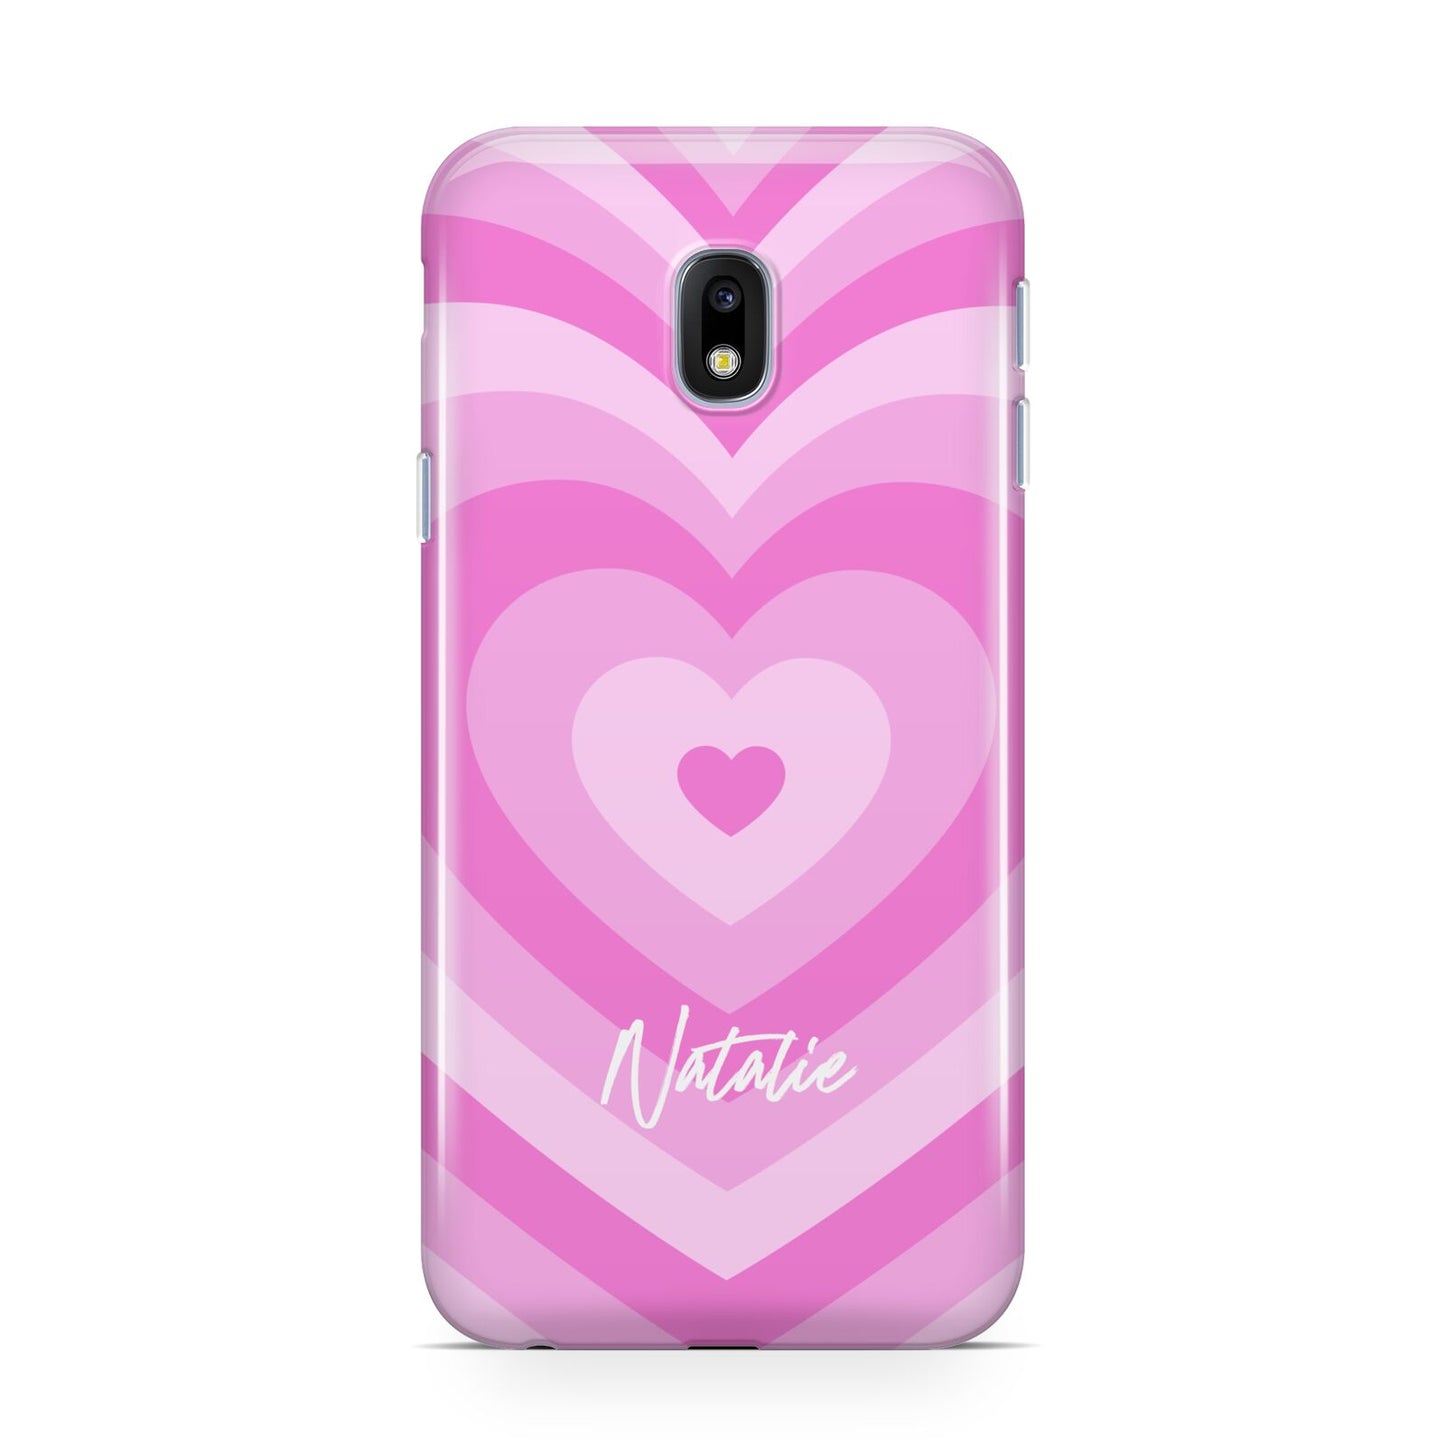 Personalised Pink Heart Samsung Galaxy J3 2017 Case